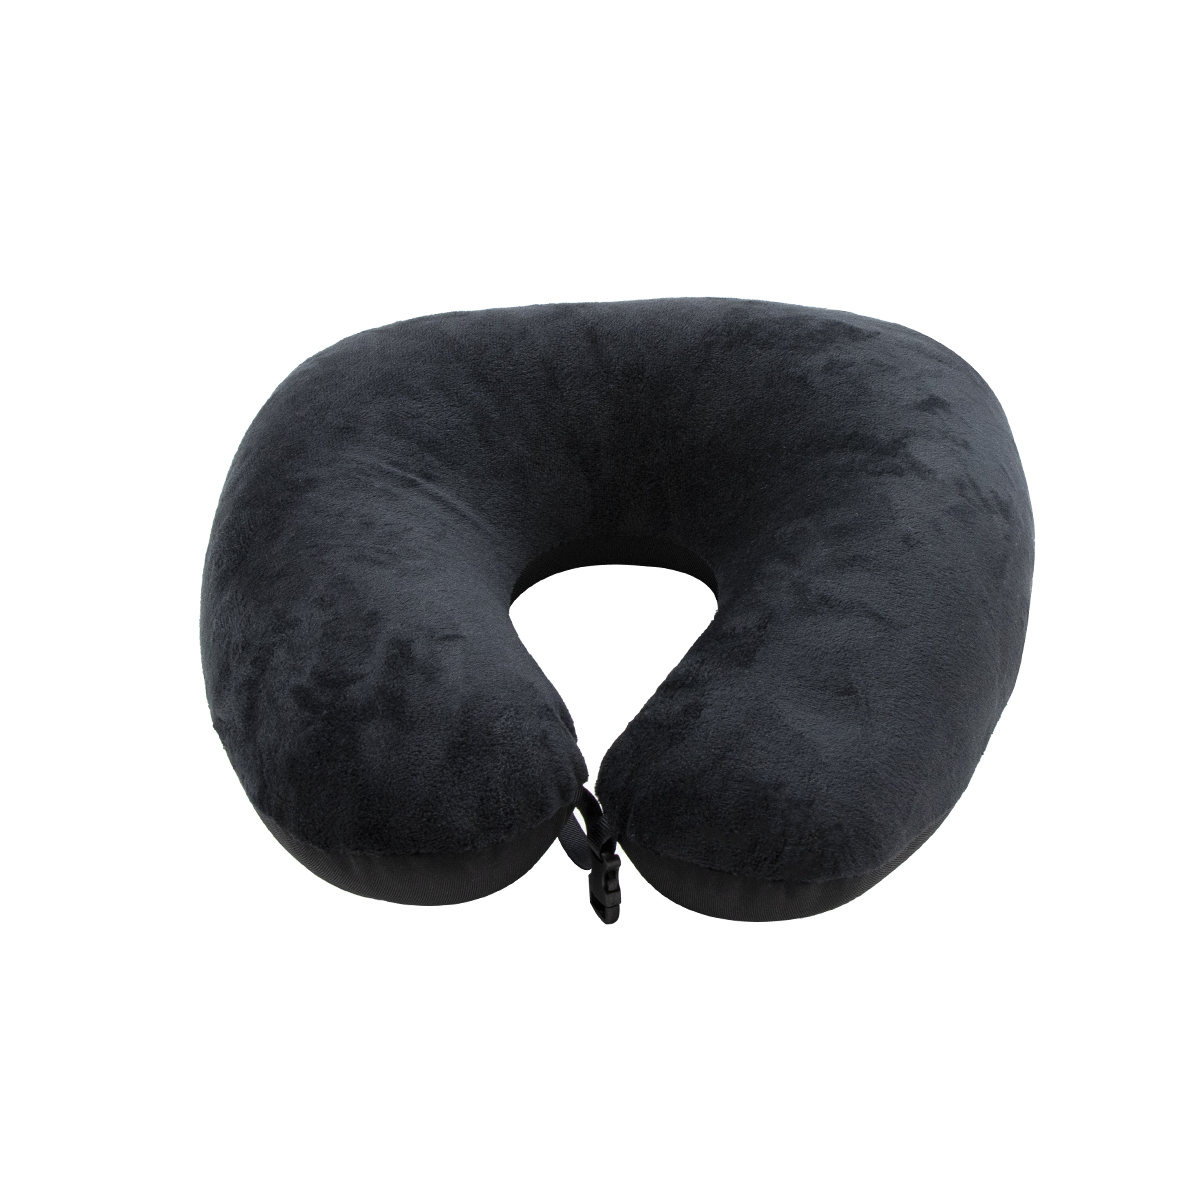 Dual-Shape Neck Pillow Different Cover Good for Summer and Winter Usage